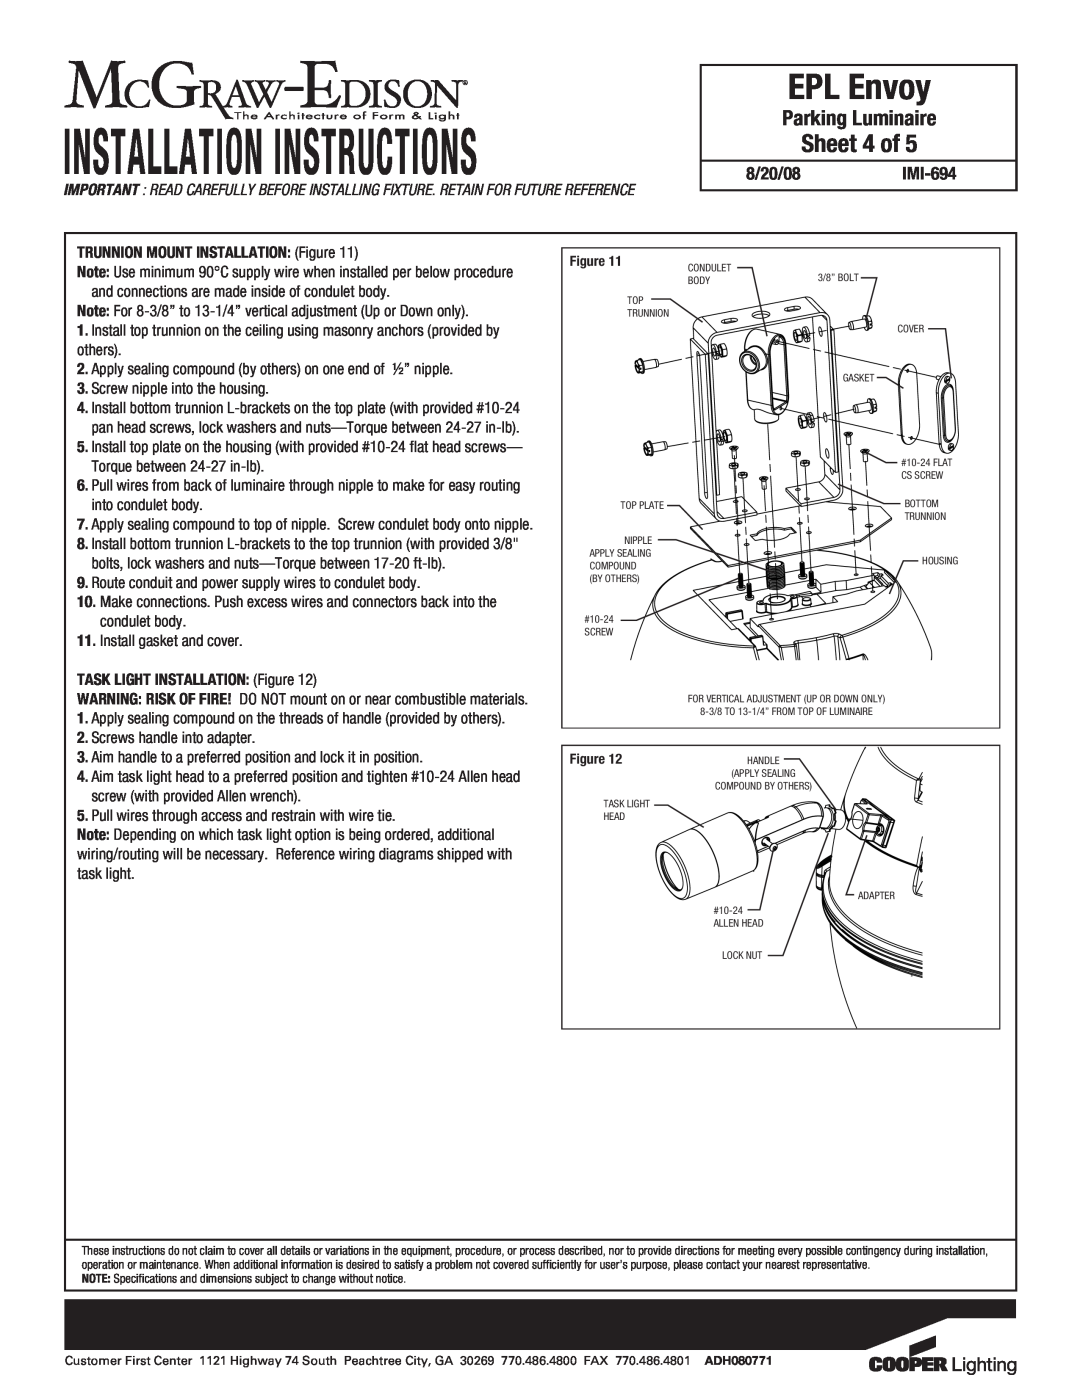 Cooper Lighting specifications Sheet 4 of, Installation Instructions, EPL Envoy, Parking Luminaire, 8/20/08IMI-694 